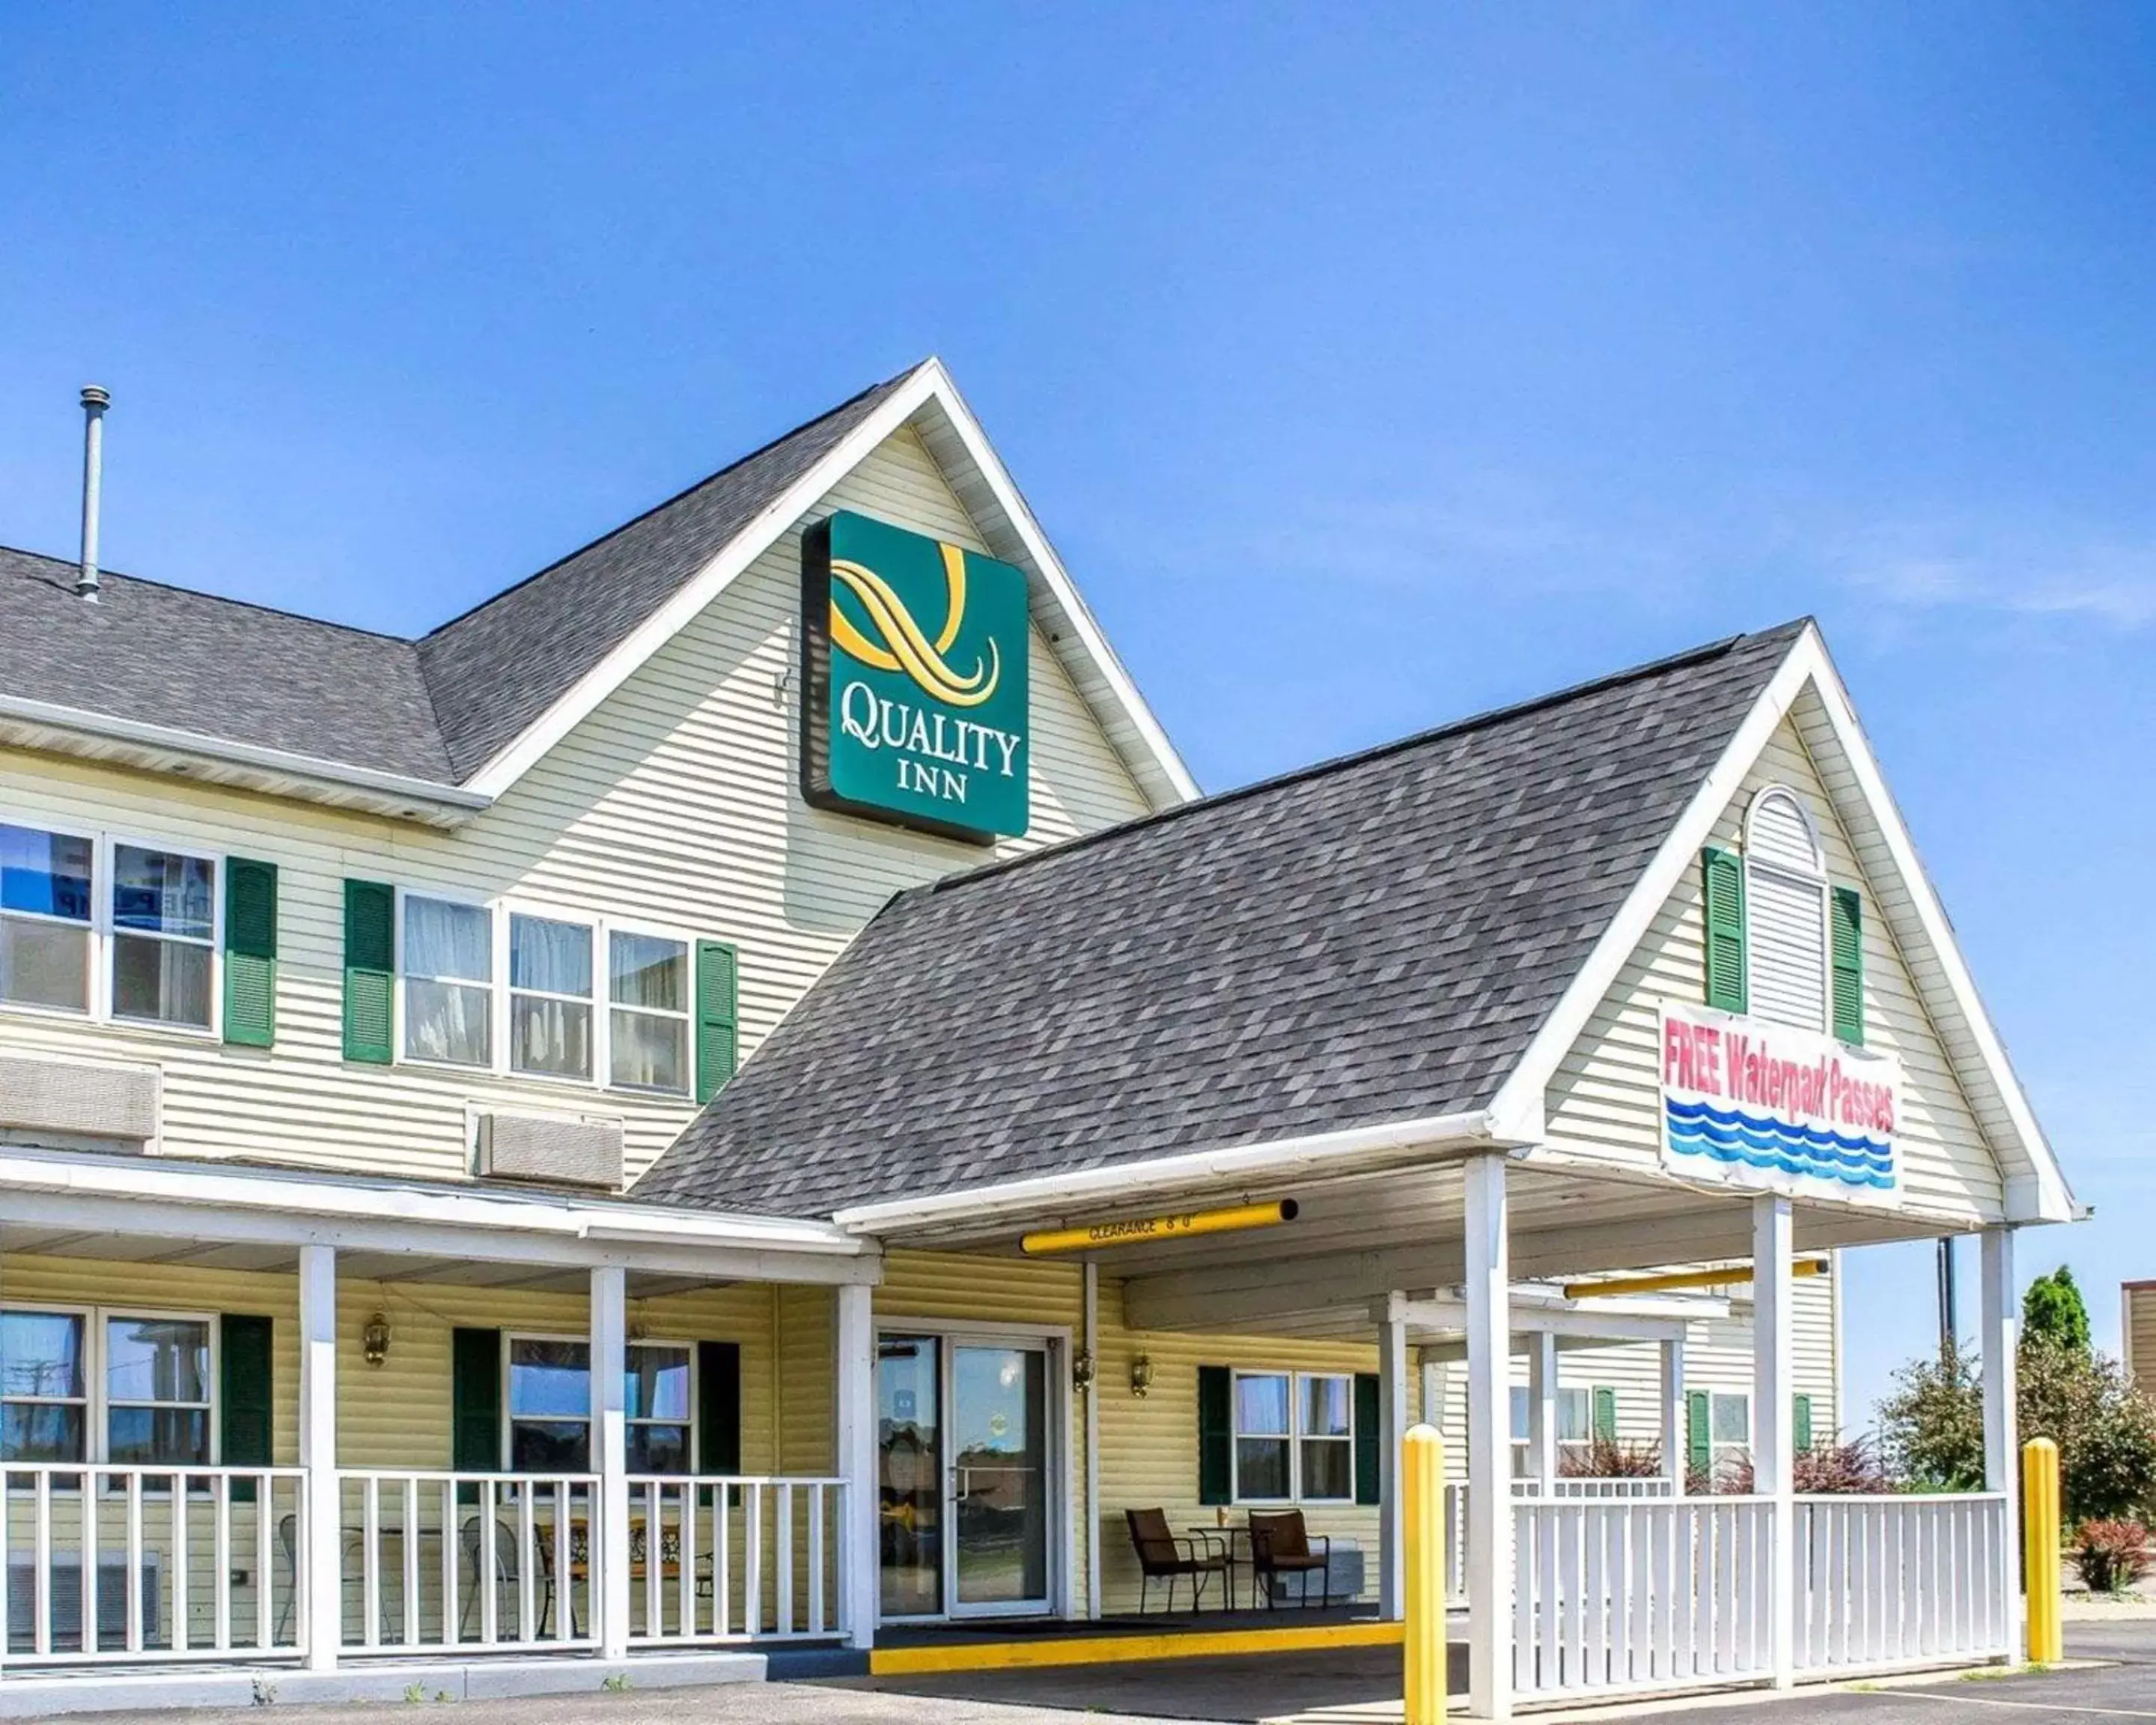 Property building in Quality Inn Mauston